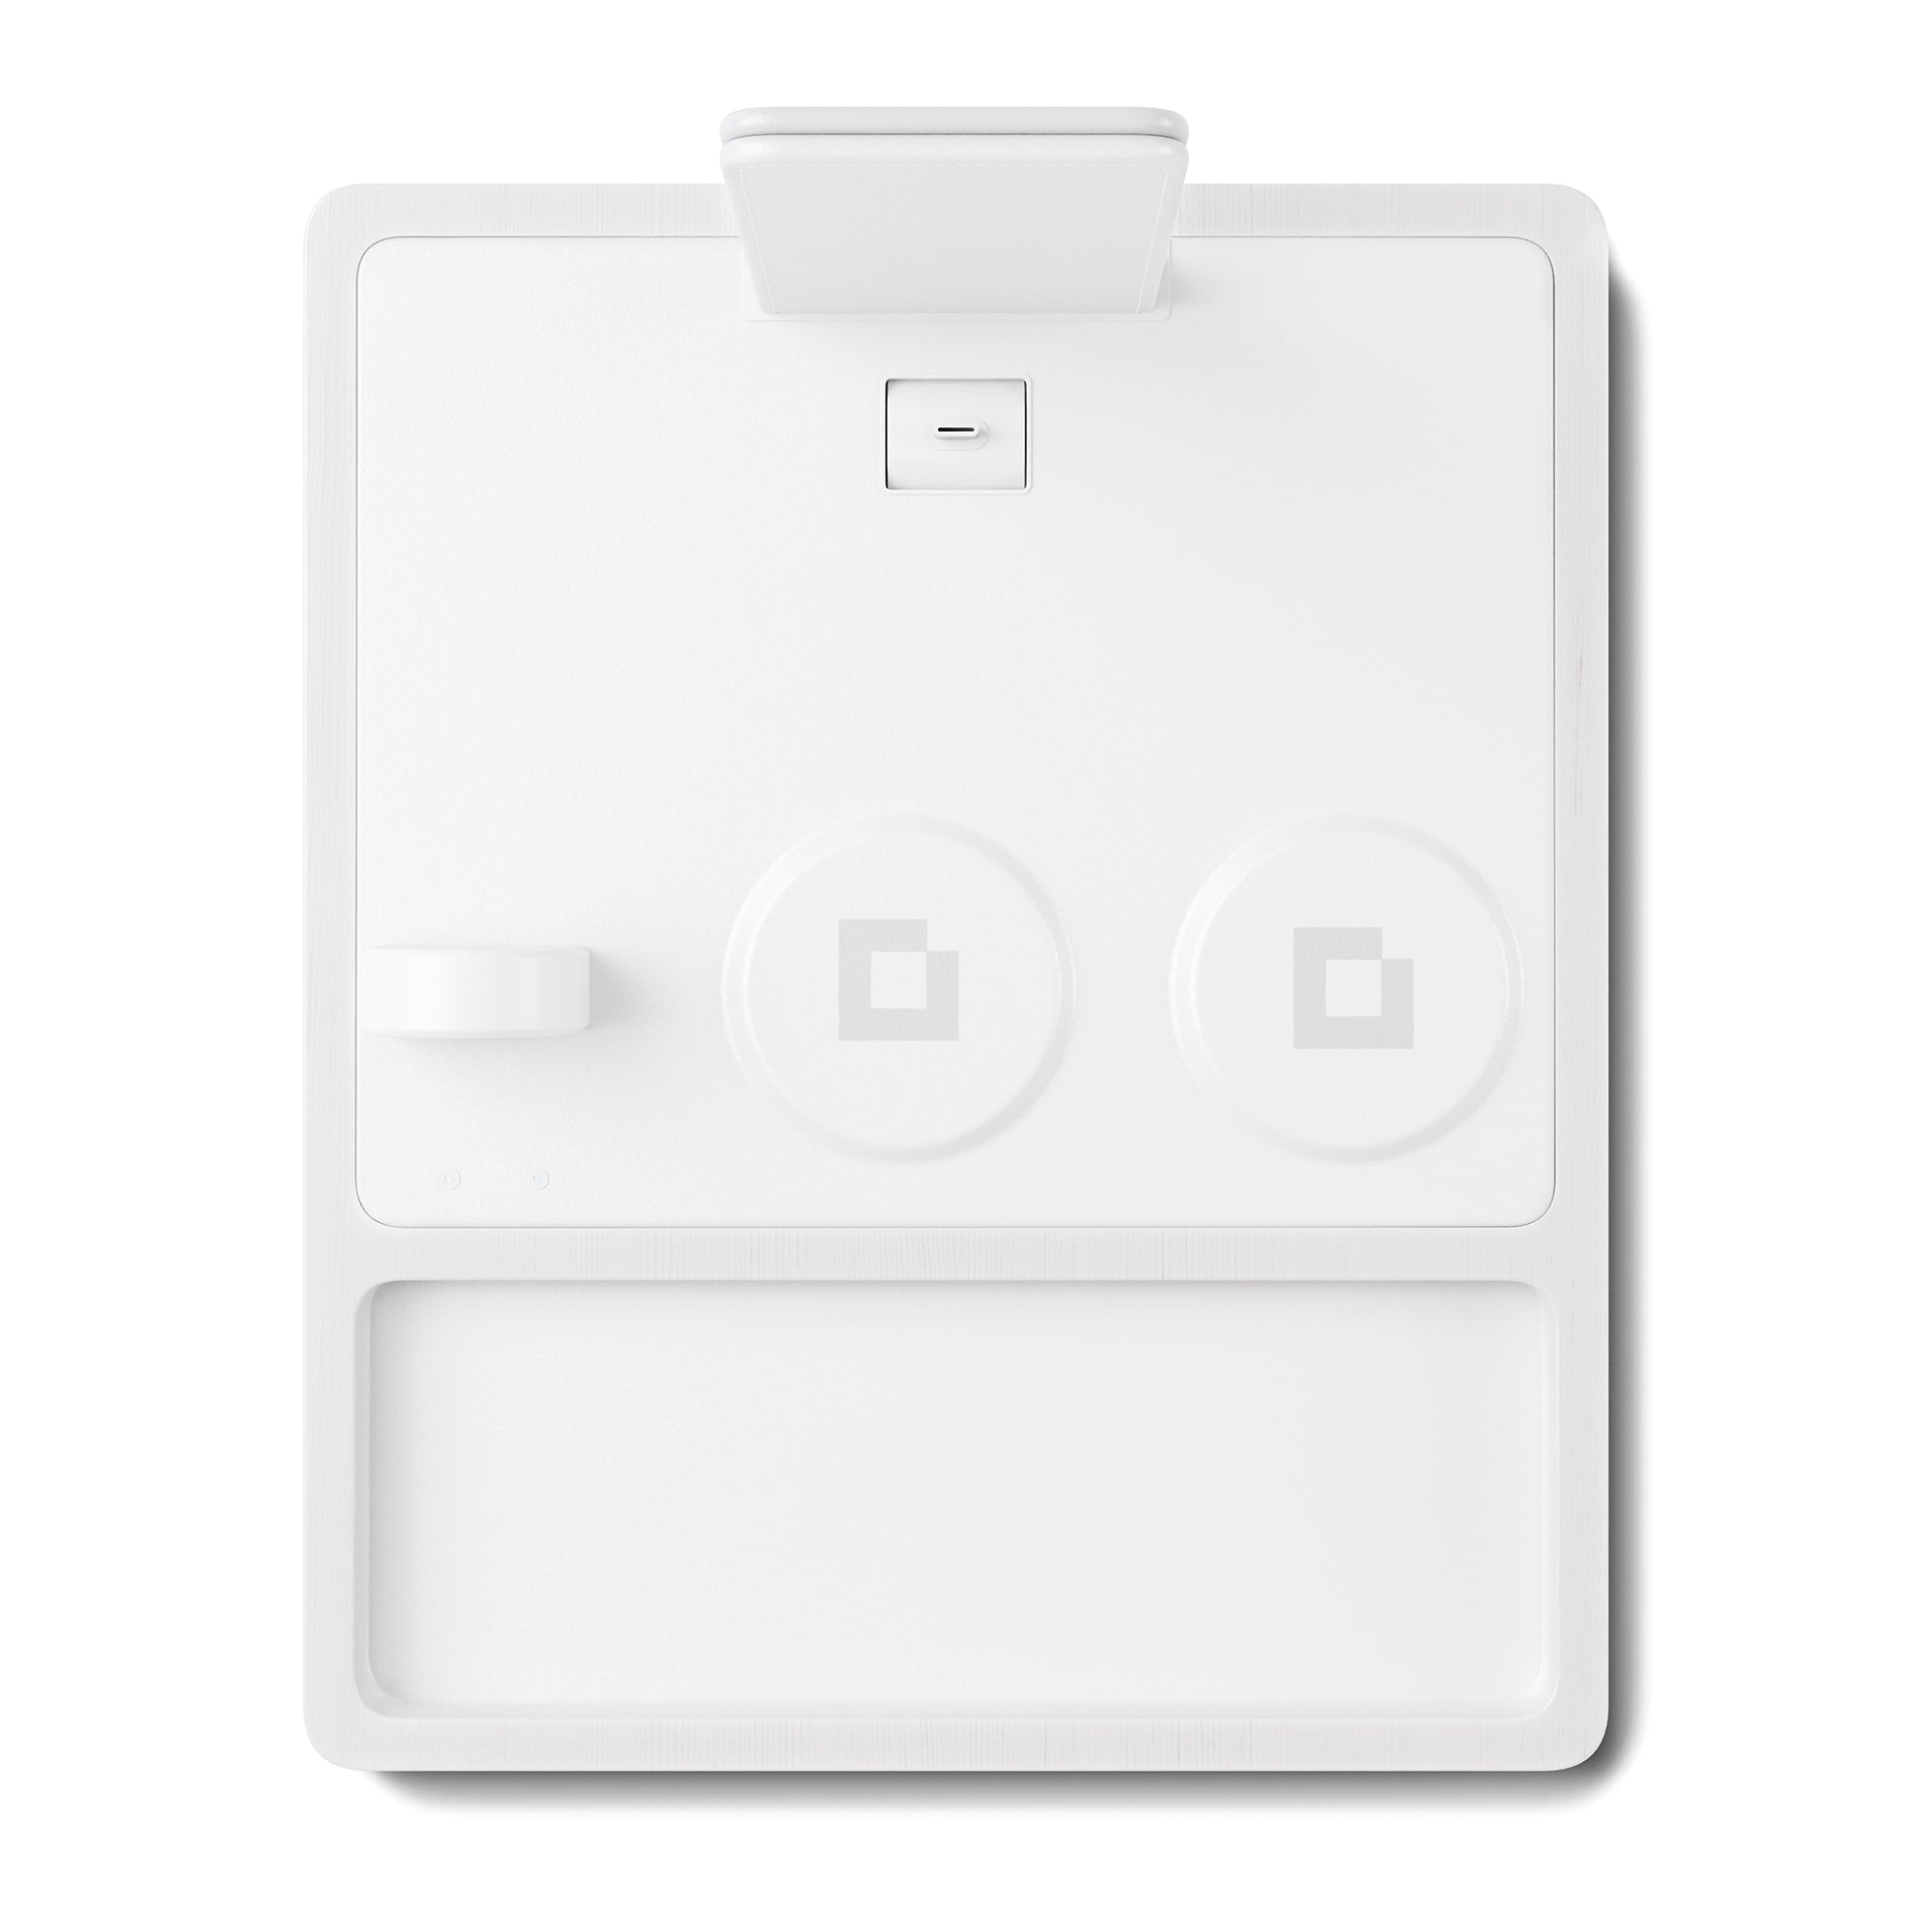 QUAD TRAY White - 4-in-1 MagSafe Rustic White Wireless Charger with iPad Stand Support top view without devices